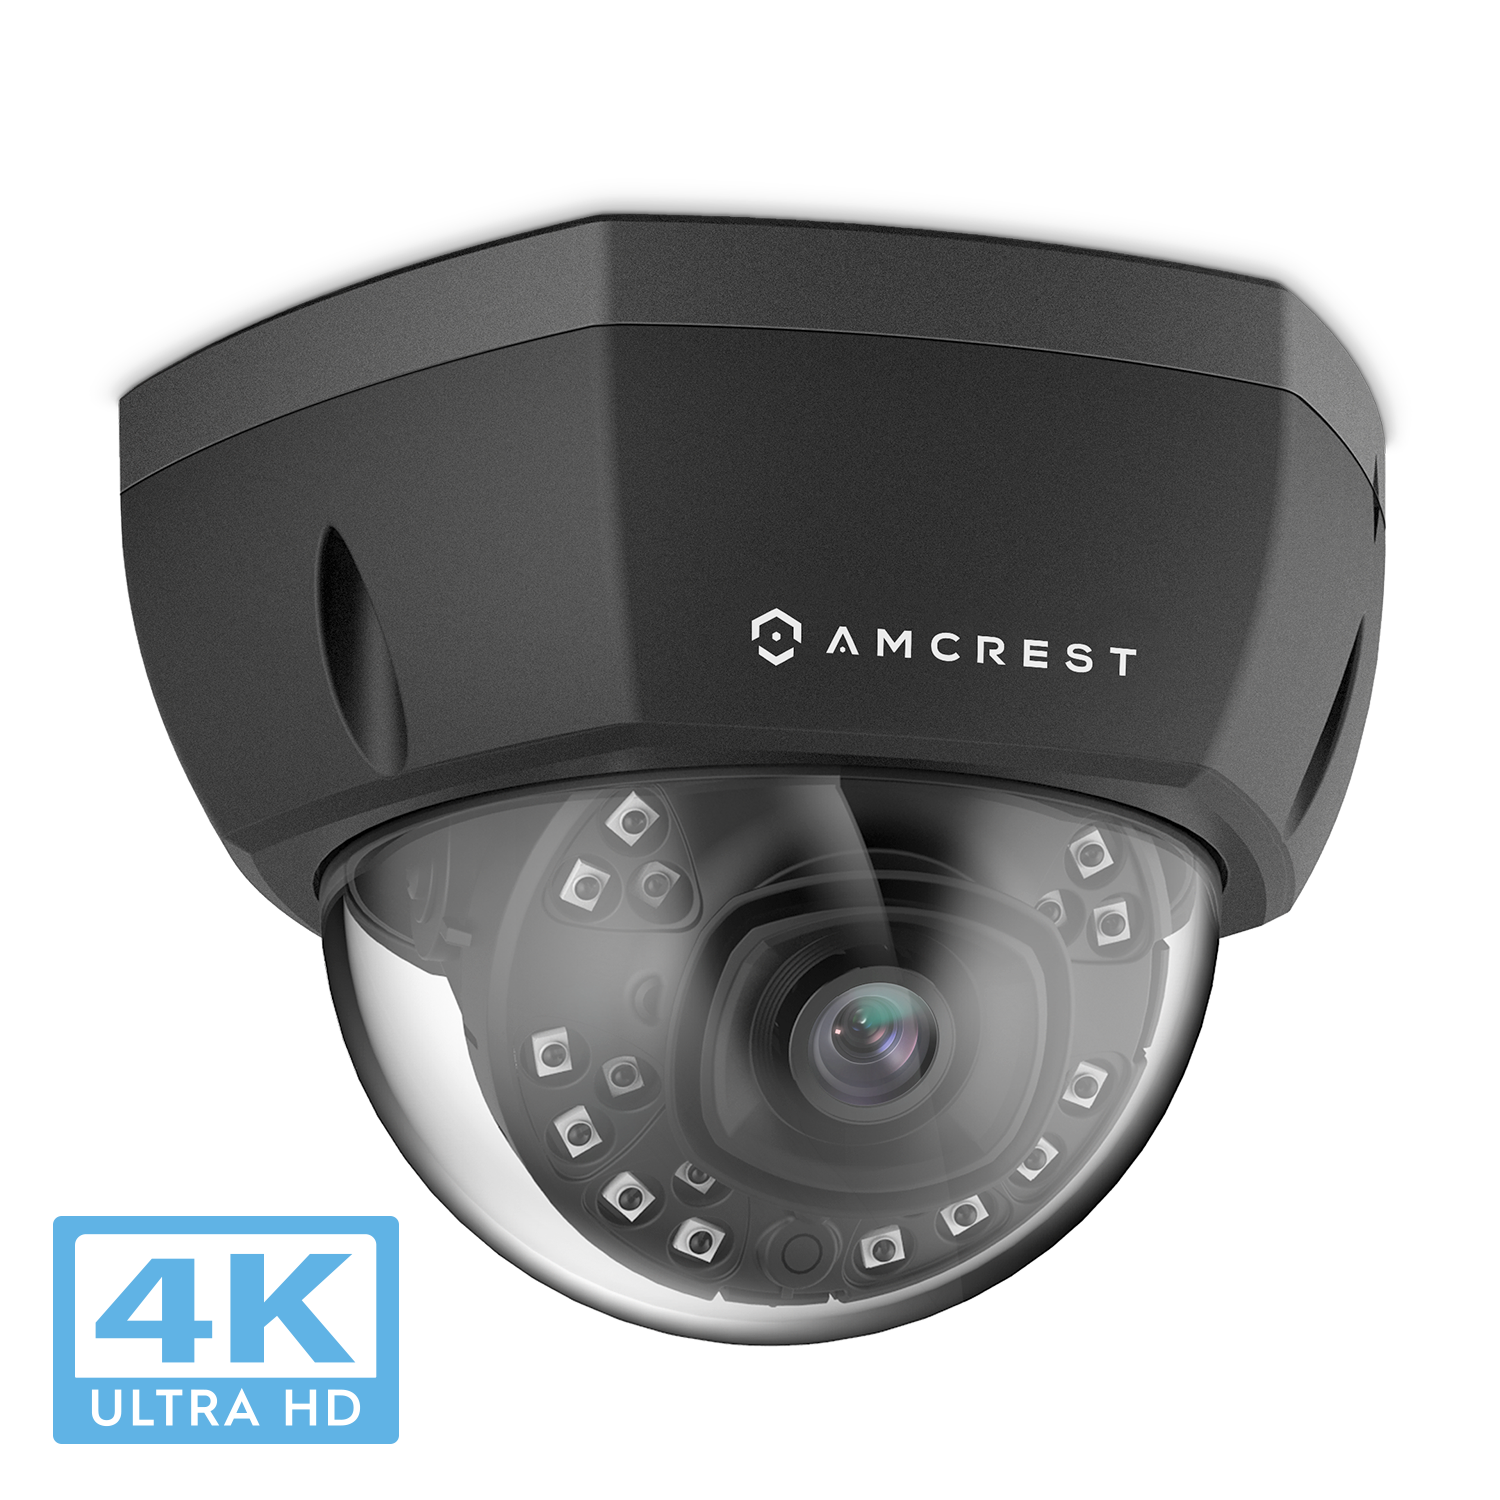 Amcrest UltraHD 8M 4K Turret PoE Dome Outdoor Security IP Camera IP8M-T2499EB 